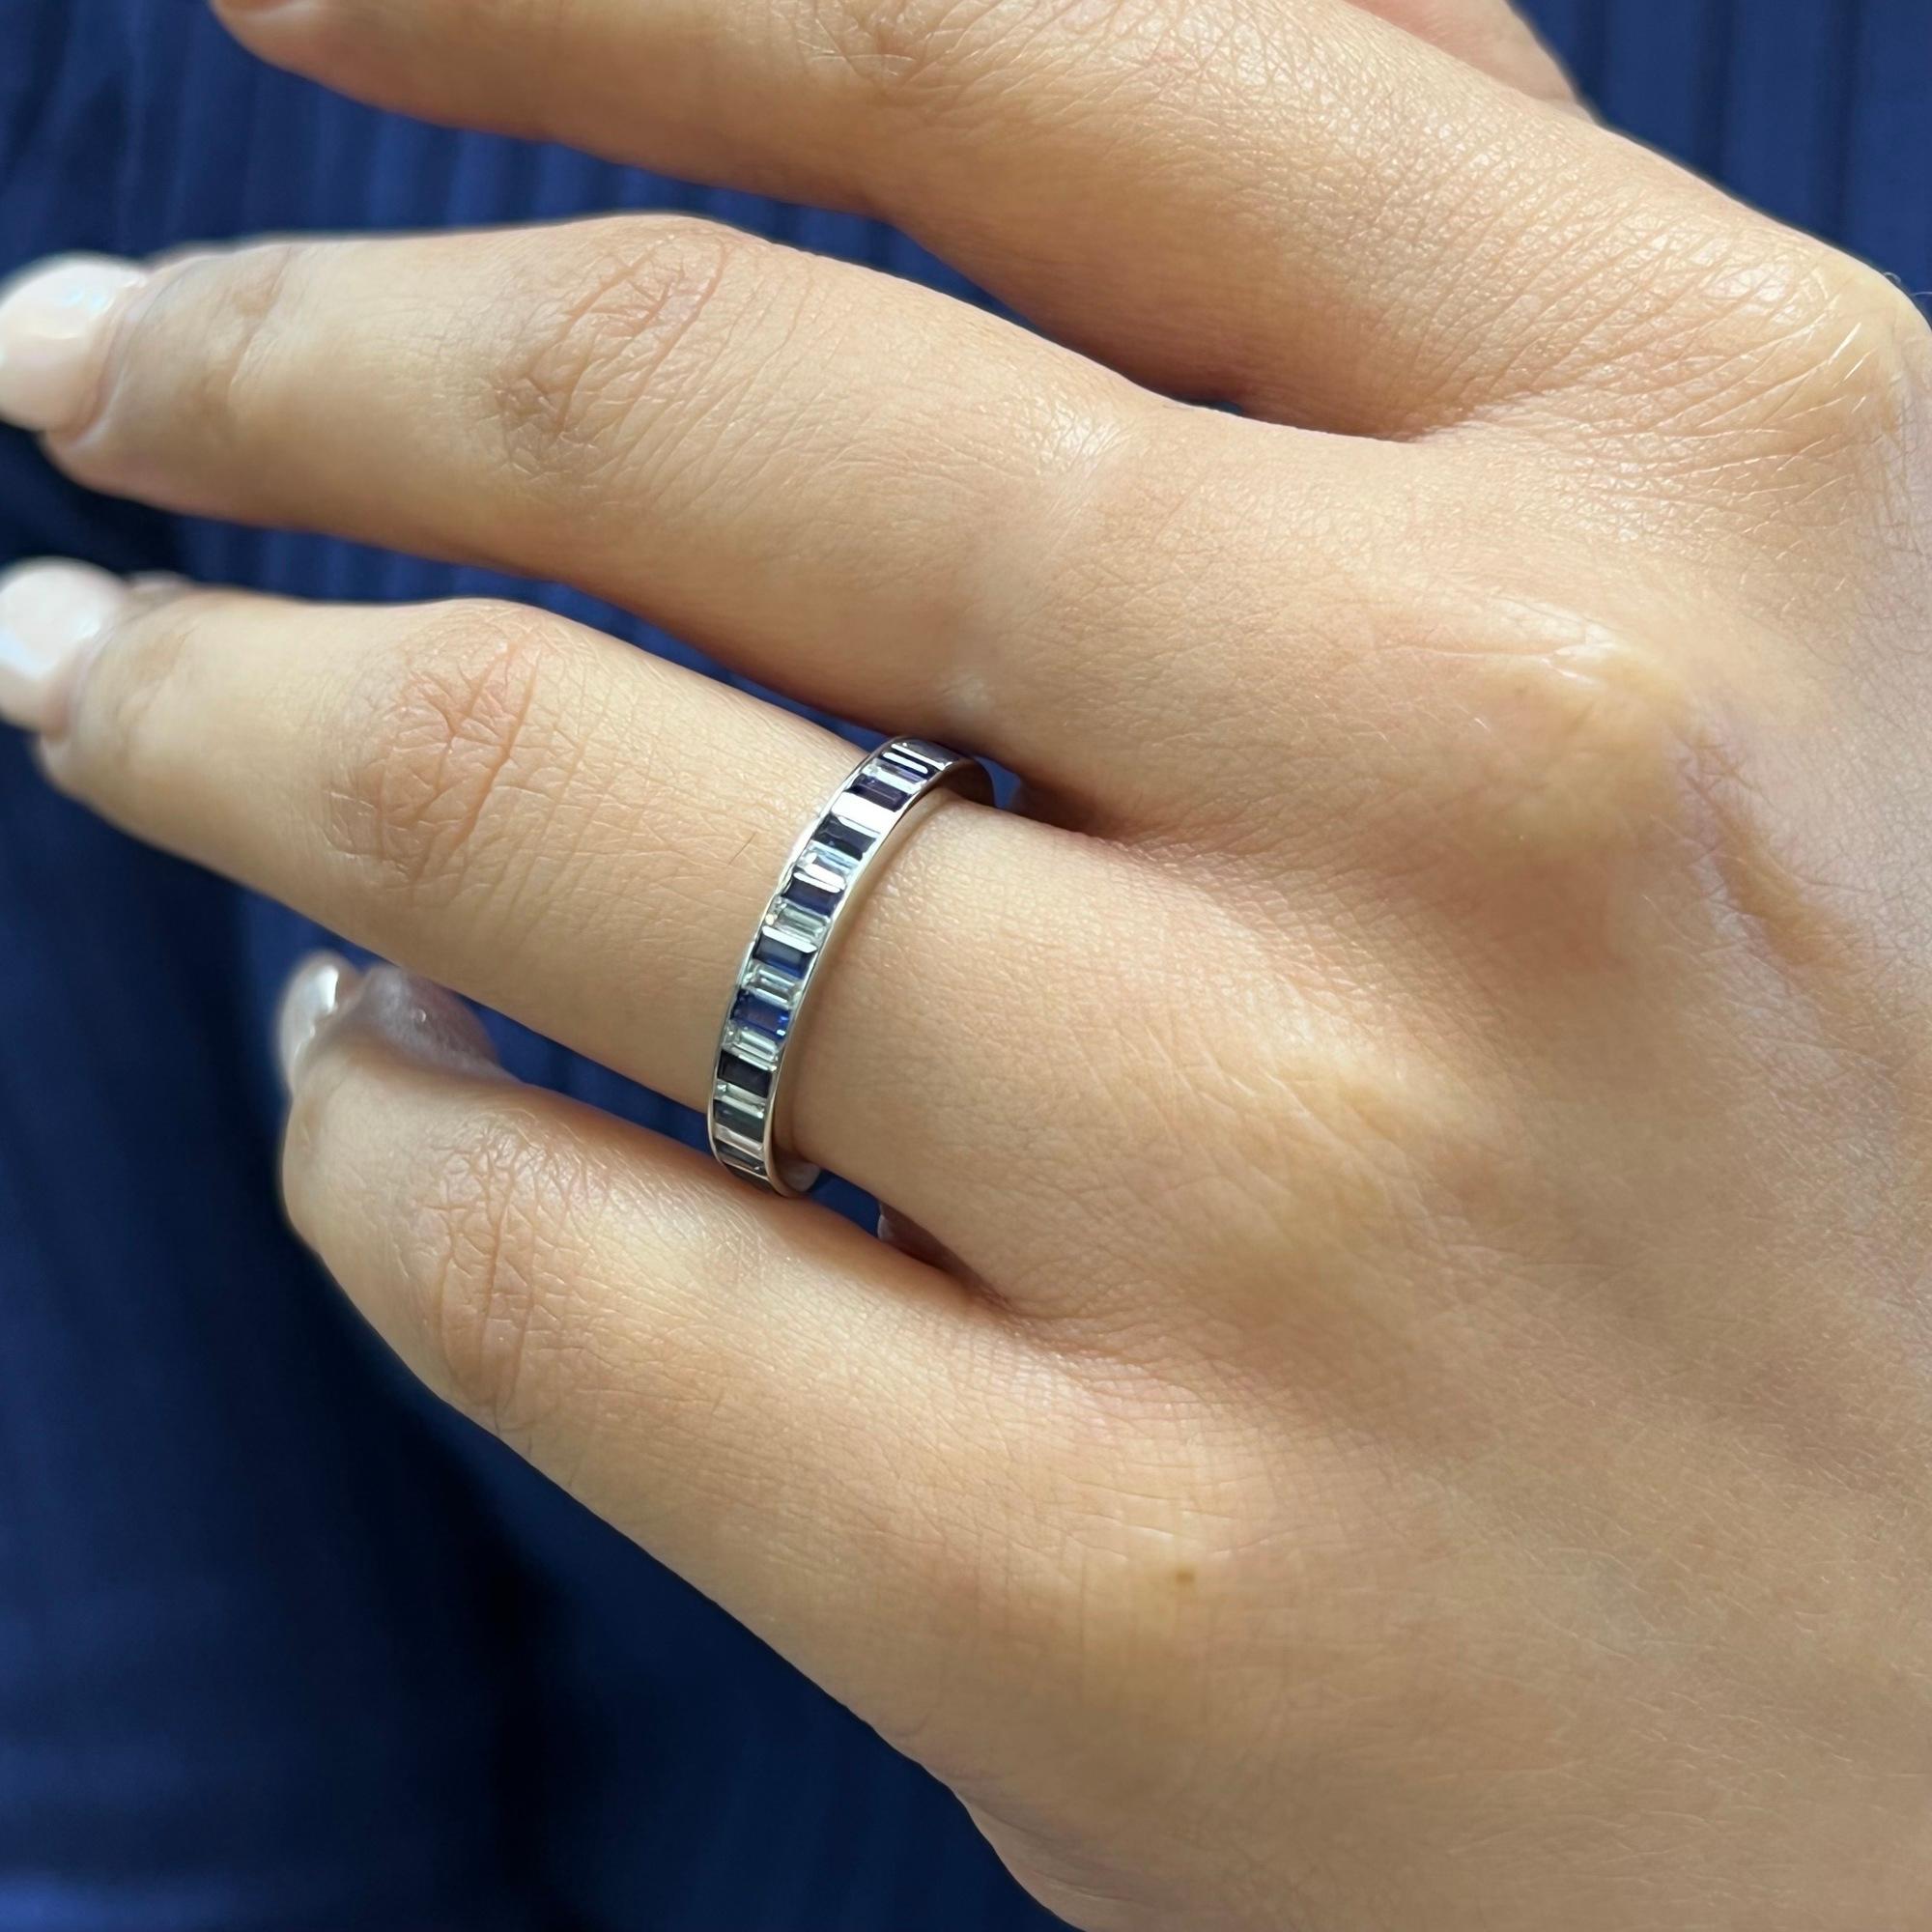 This beautiful eternity band ring features baguette cut scintillating blue sapphires and baguette cut sparkling diamonds. Alternatively secured in channel setting. Crafted expertly in Platinum. Arranged in a full eternity and offer a spectacular